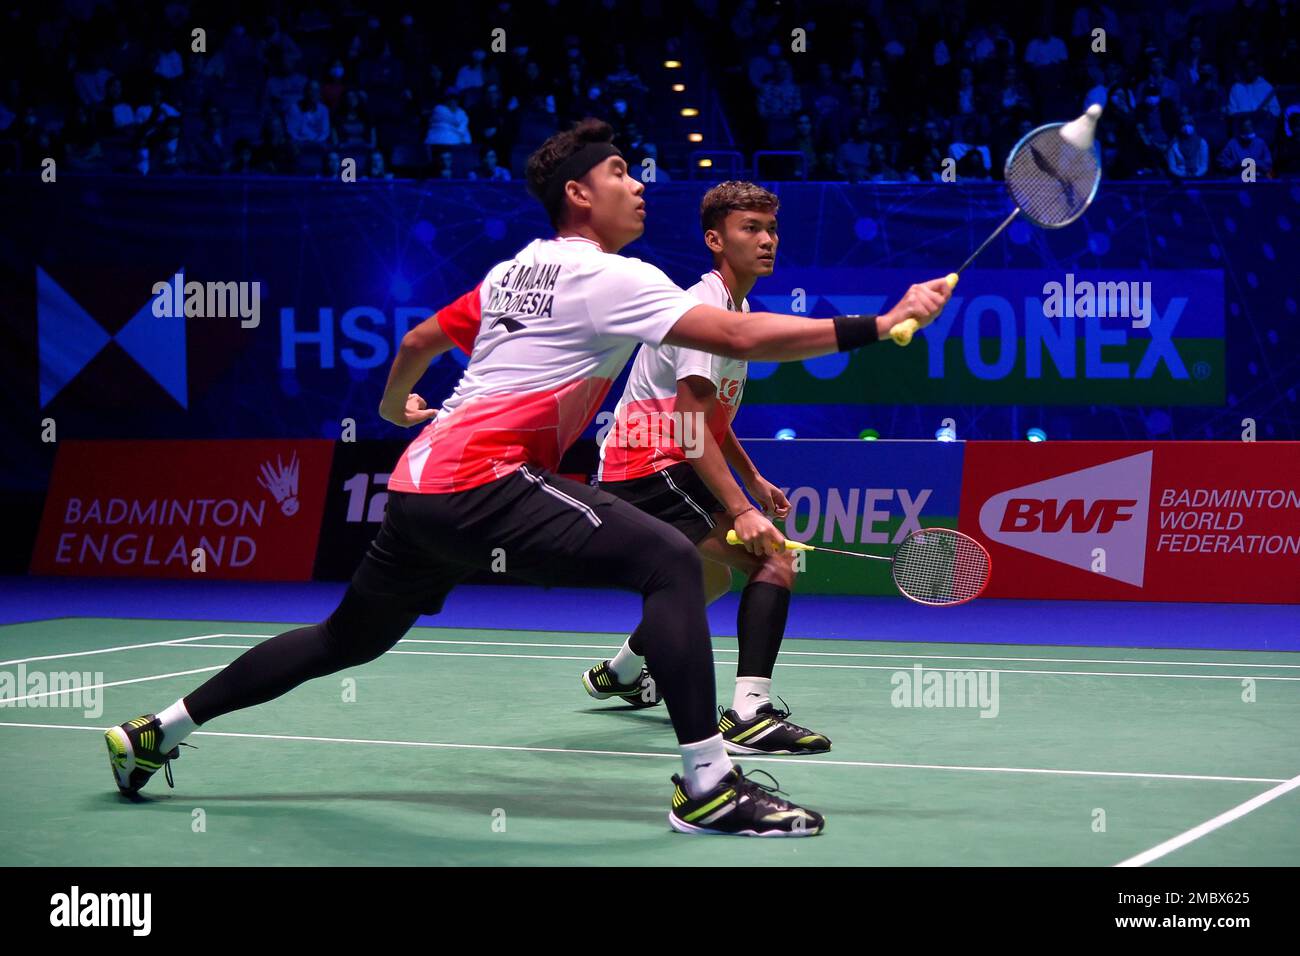 Indonesias Muhammad Shohibul Fikri and Bagas Maulana (right) celebrate victory over Indonesias Mohammad Ahshan and Hendra Setiawan during day five of the YONEX All England Open Badminton Championships at the Utilita Arena